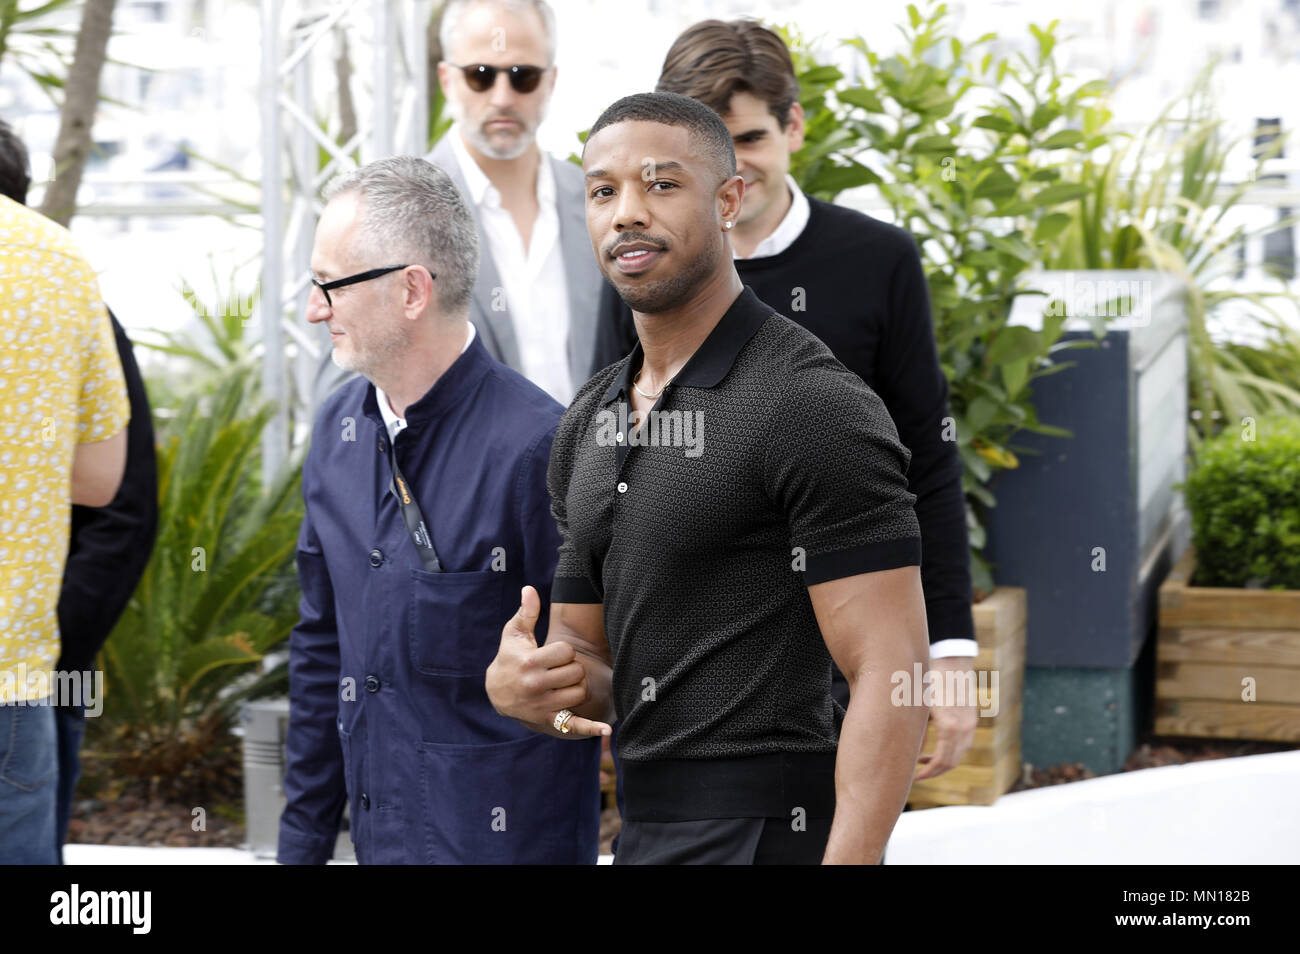 Michael B. Jordan Owns The Classic Polo Shirt At The Cannes Film Festival -  DMARGE